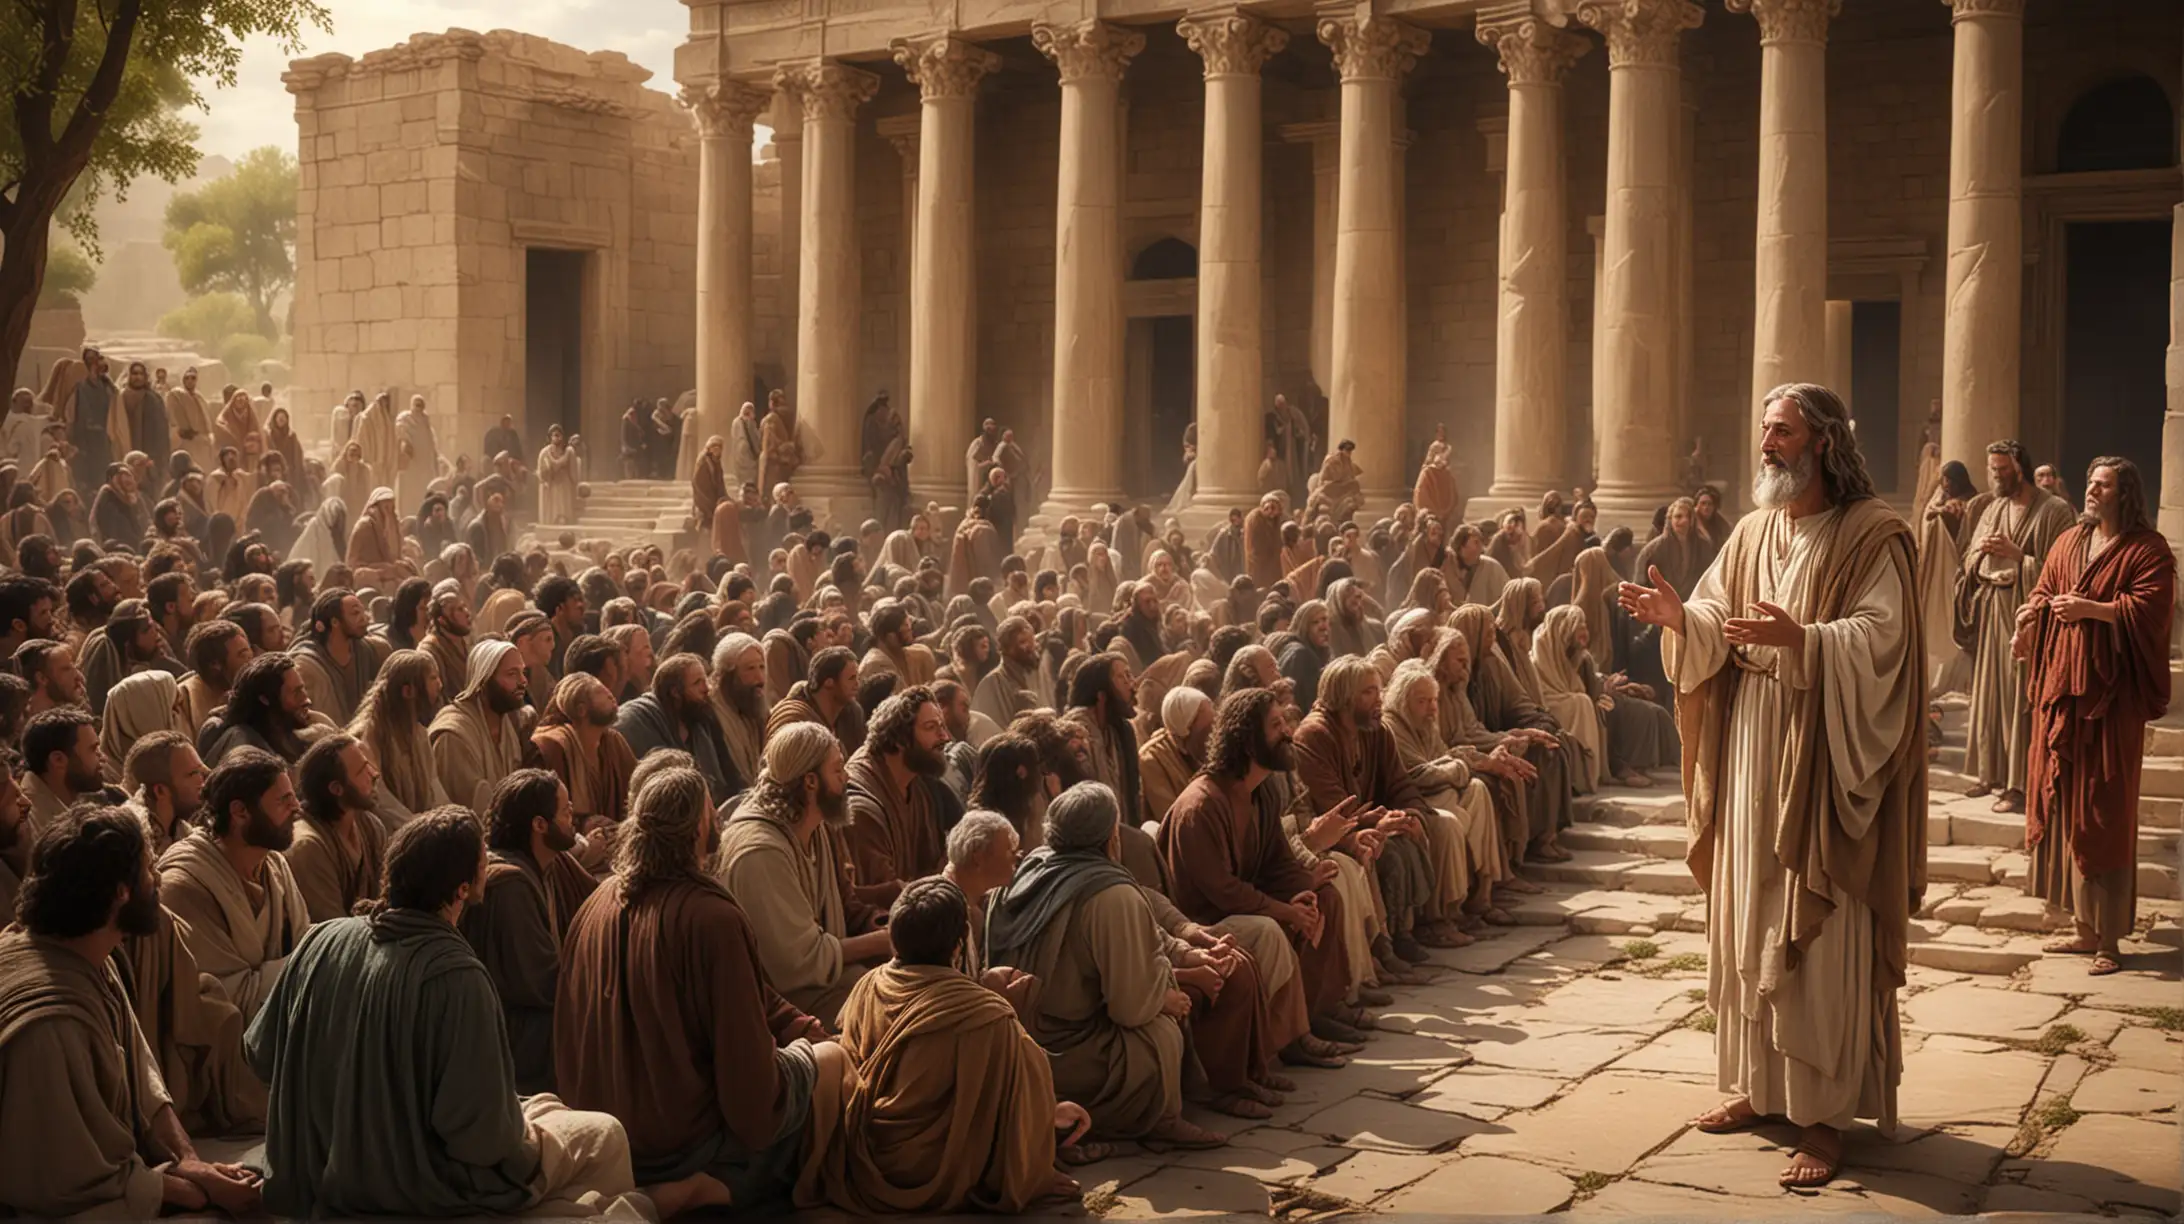 Biblical Prophet Isaiah Addressing a Crowd in Temple Setting